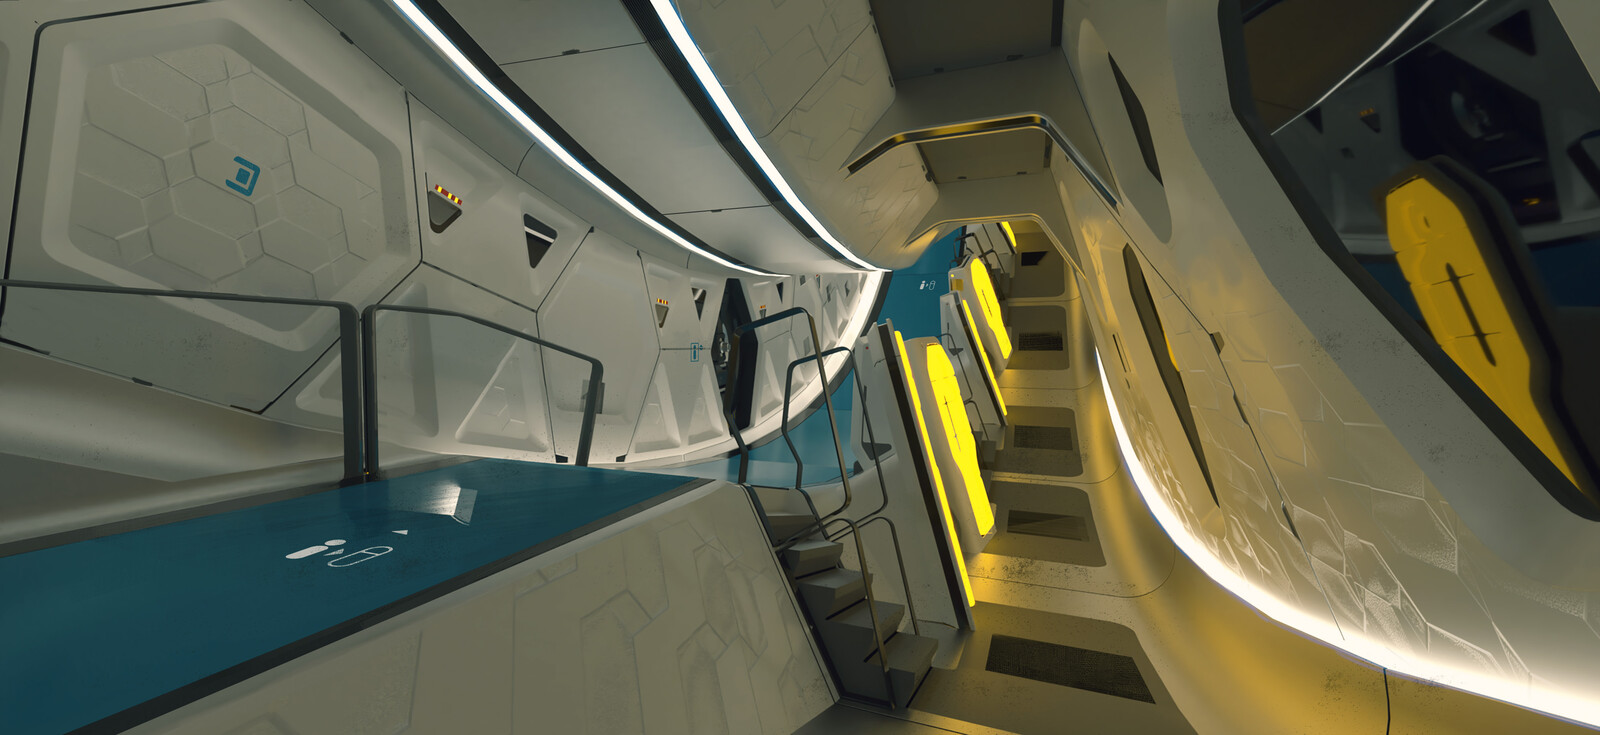 FTL inside, main shape was done by William Cheng, my task was to work the material, lighting and walls detail